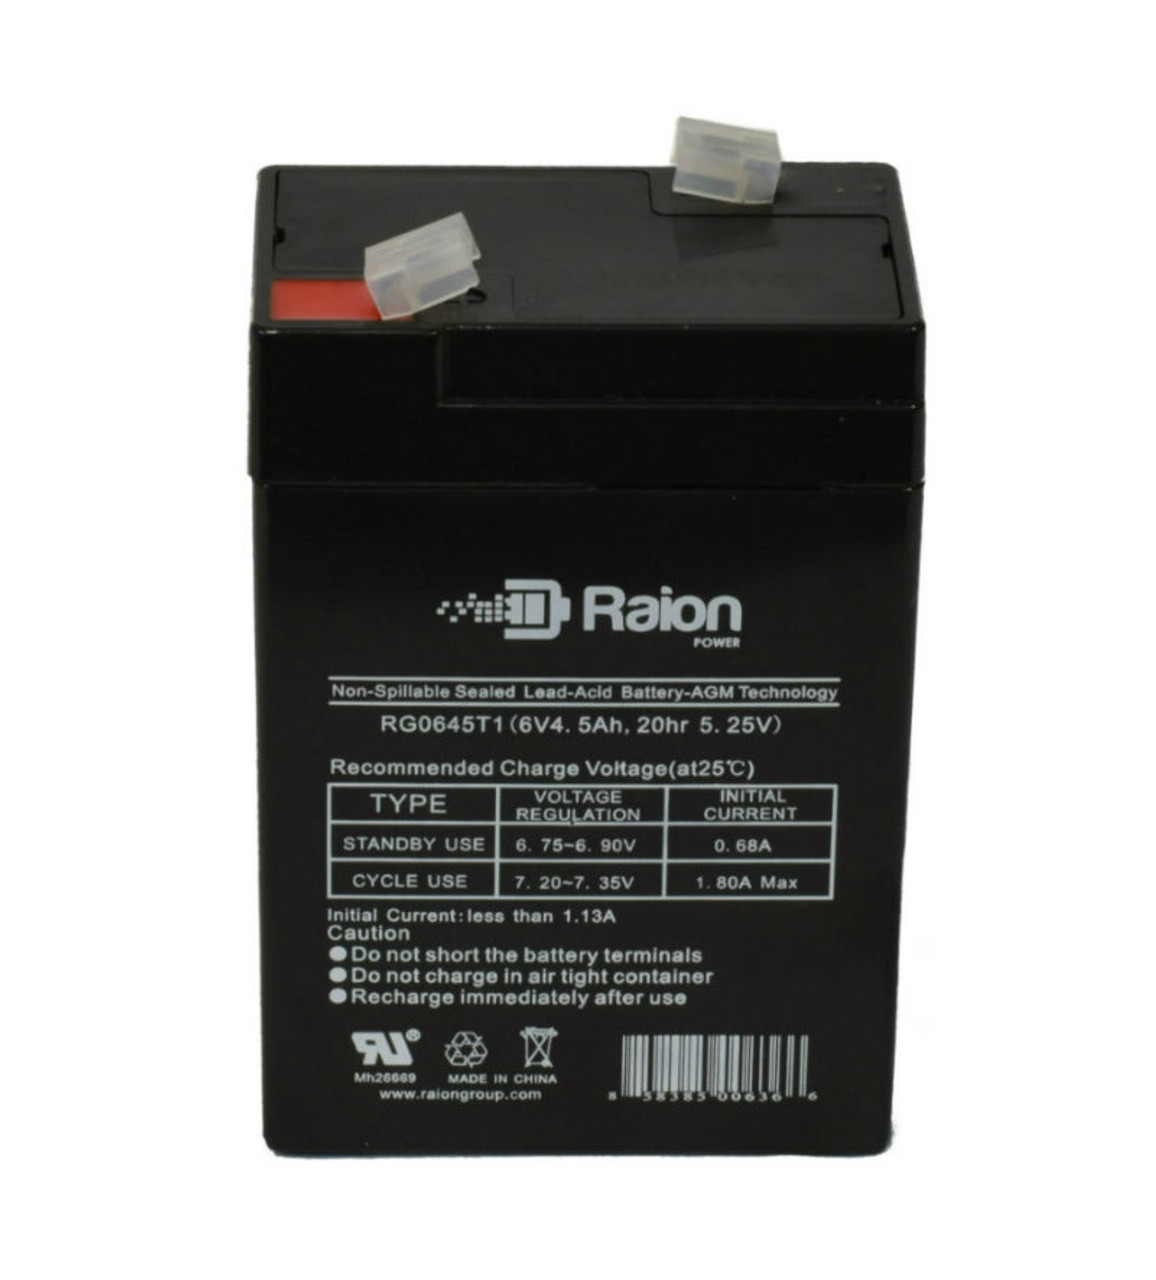 Raion Power RG0645T1 Replacement Battery Cartridge for SES BT6-6(I)